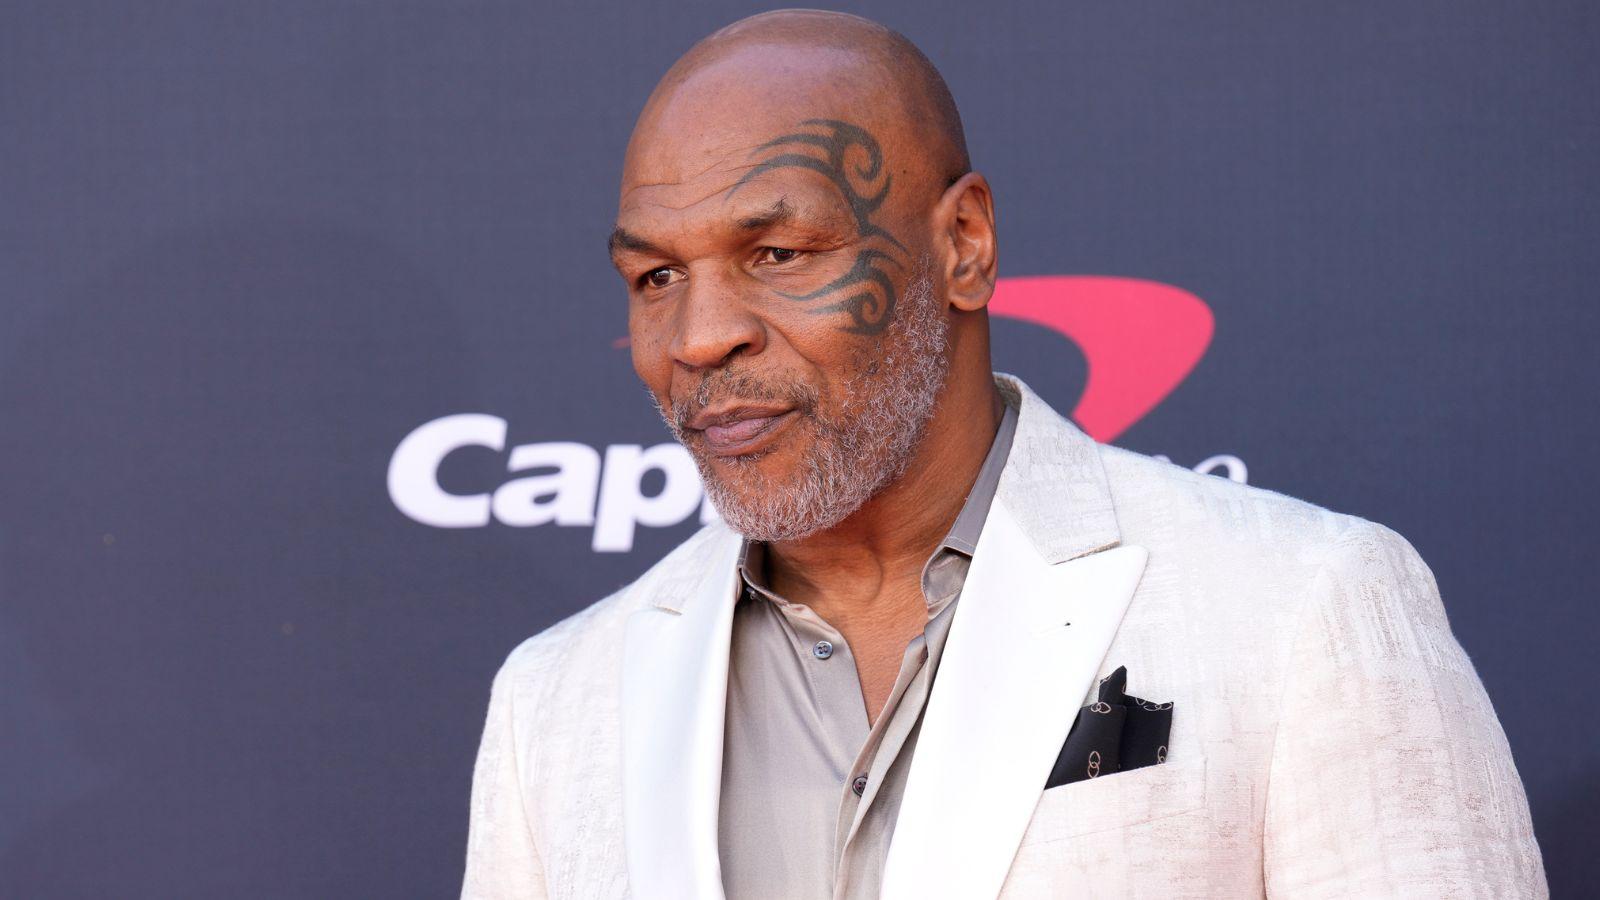 Mike Tyson at an event.